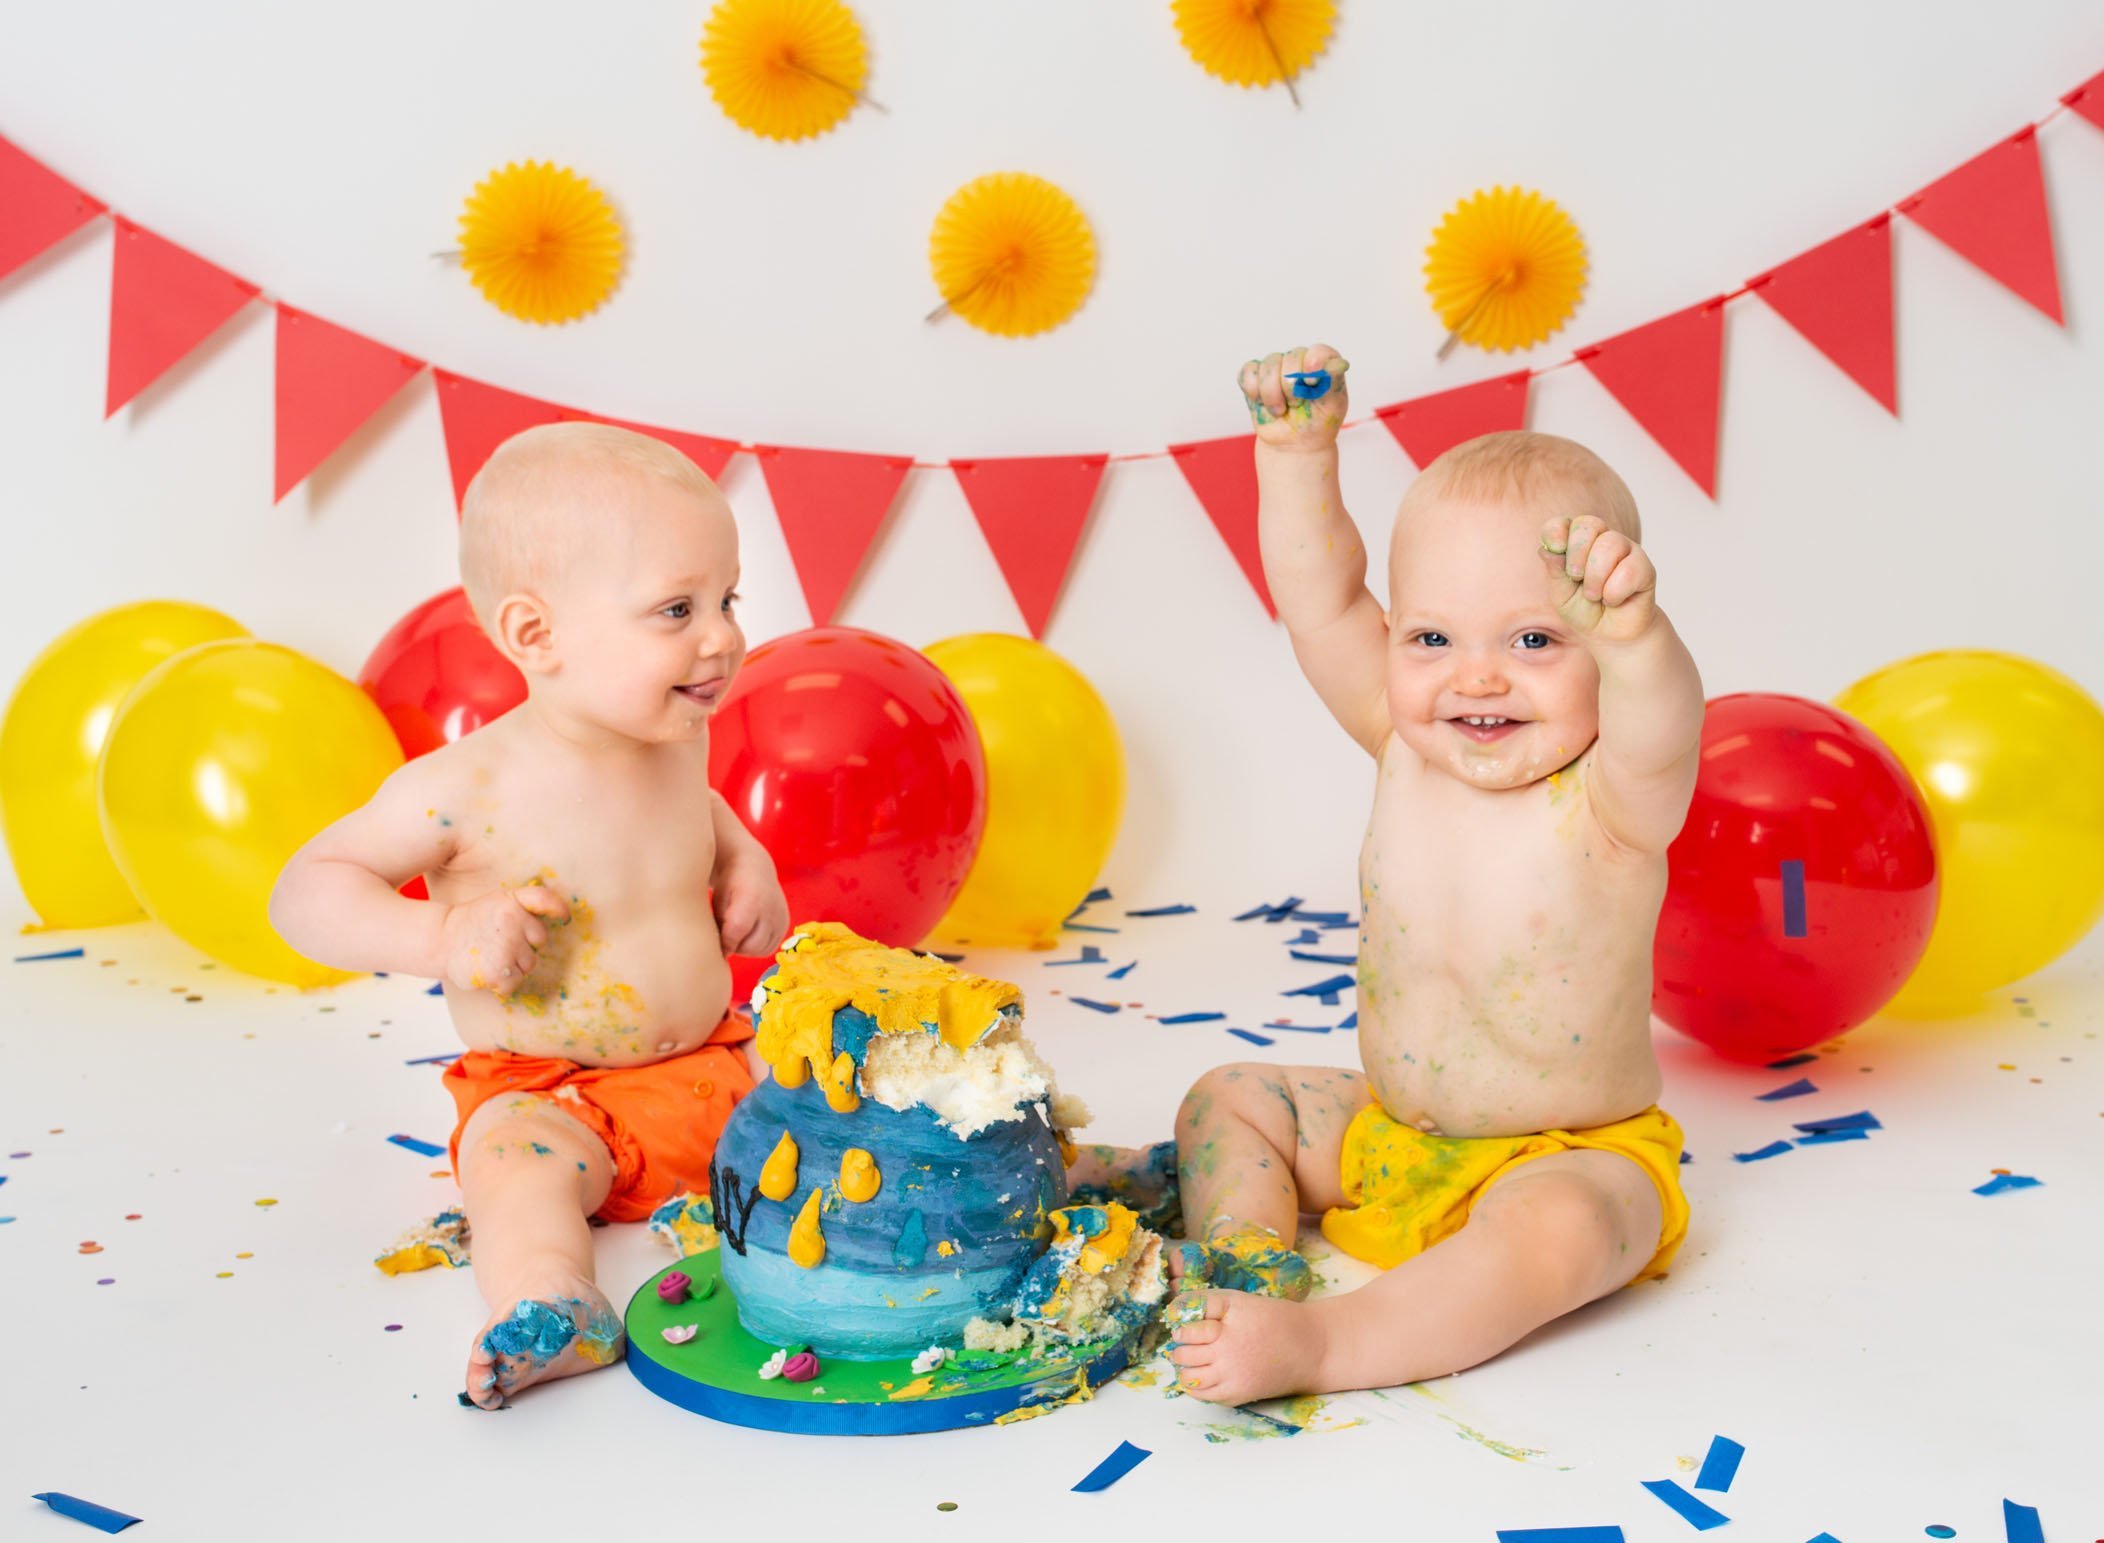 Twin 1 year old boys messy after smashing their Winnie the Pooh cake